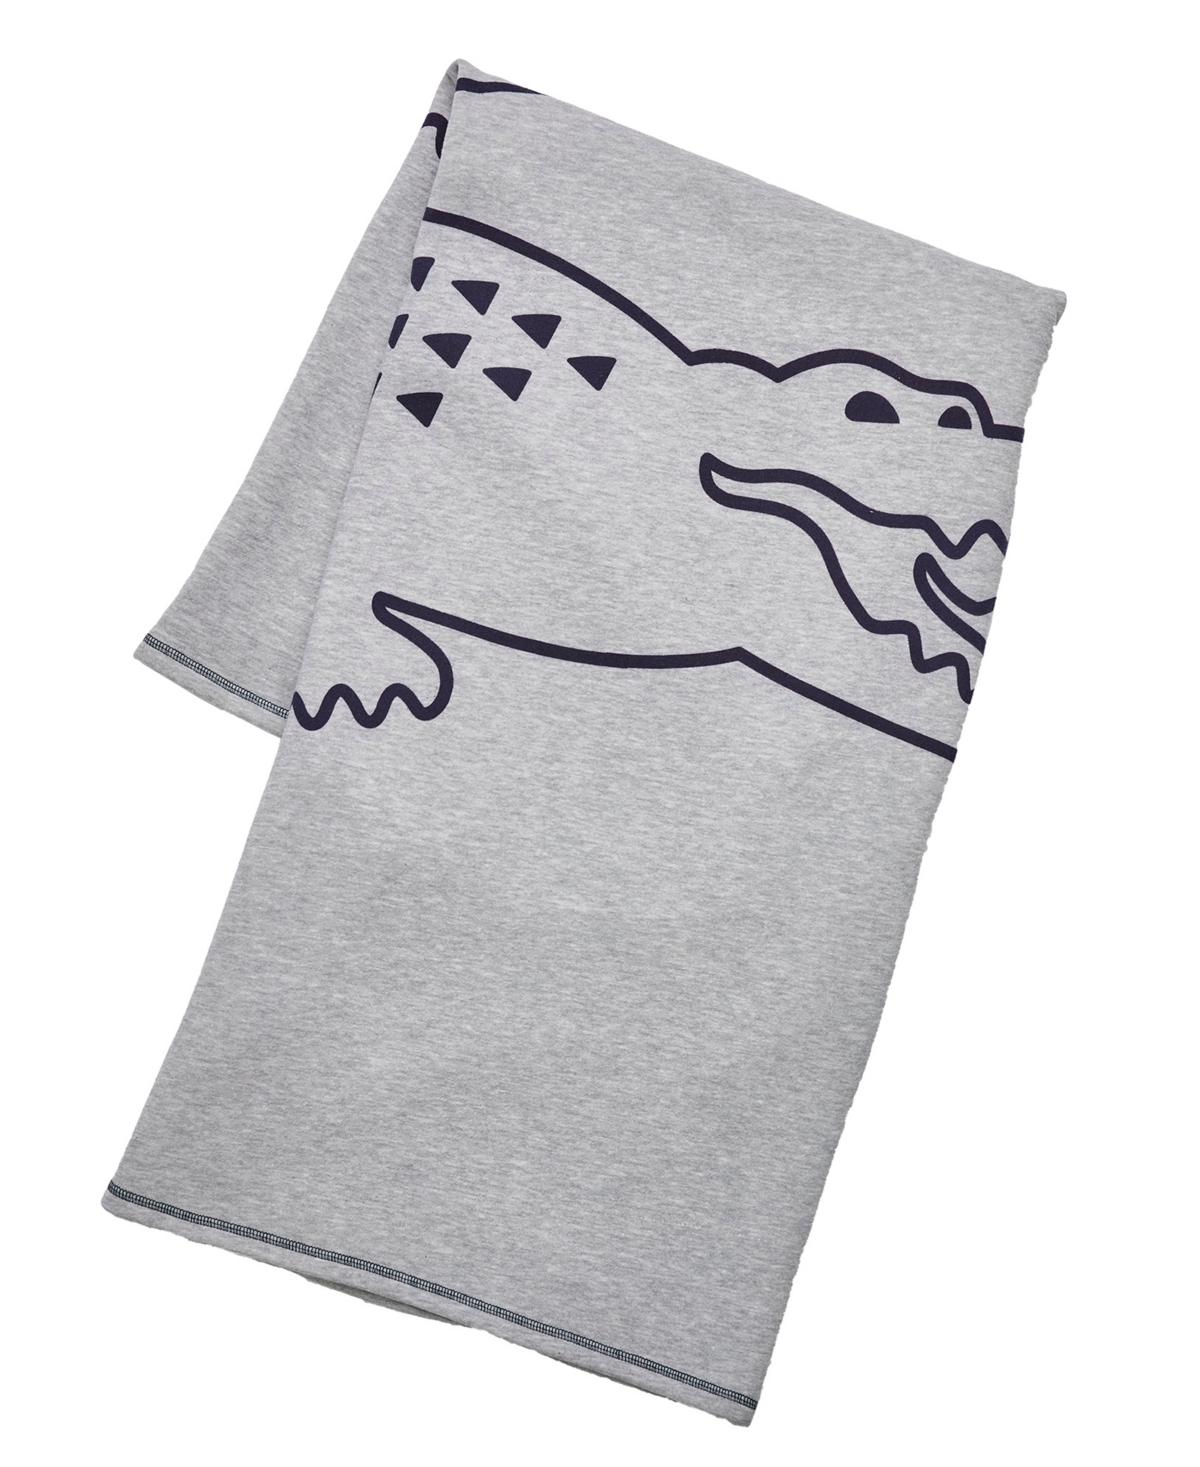 Lacoste Home Vintage-like Croc Throw Bedding In Gray